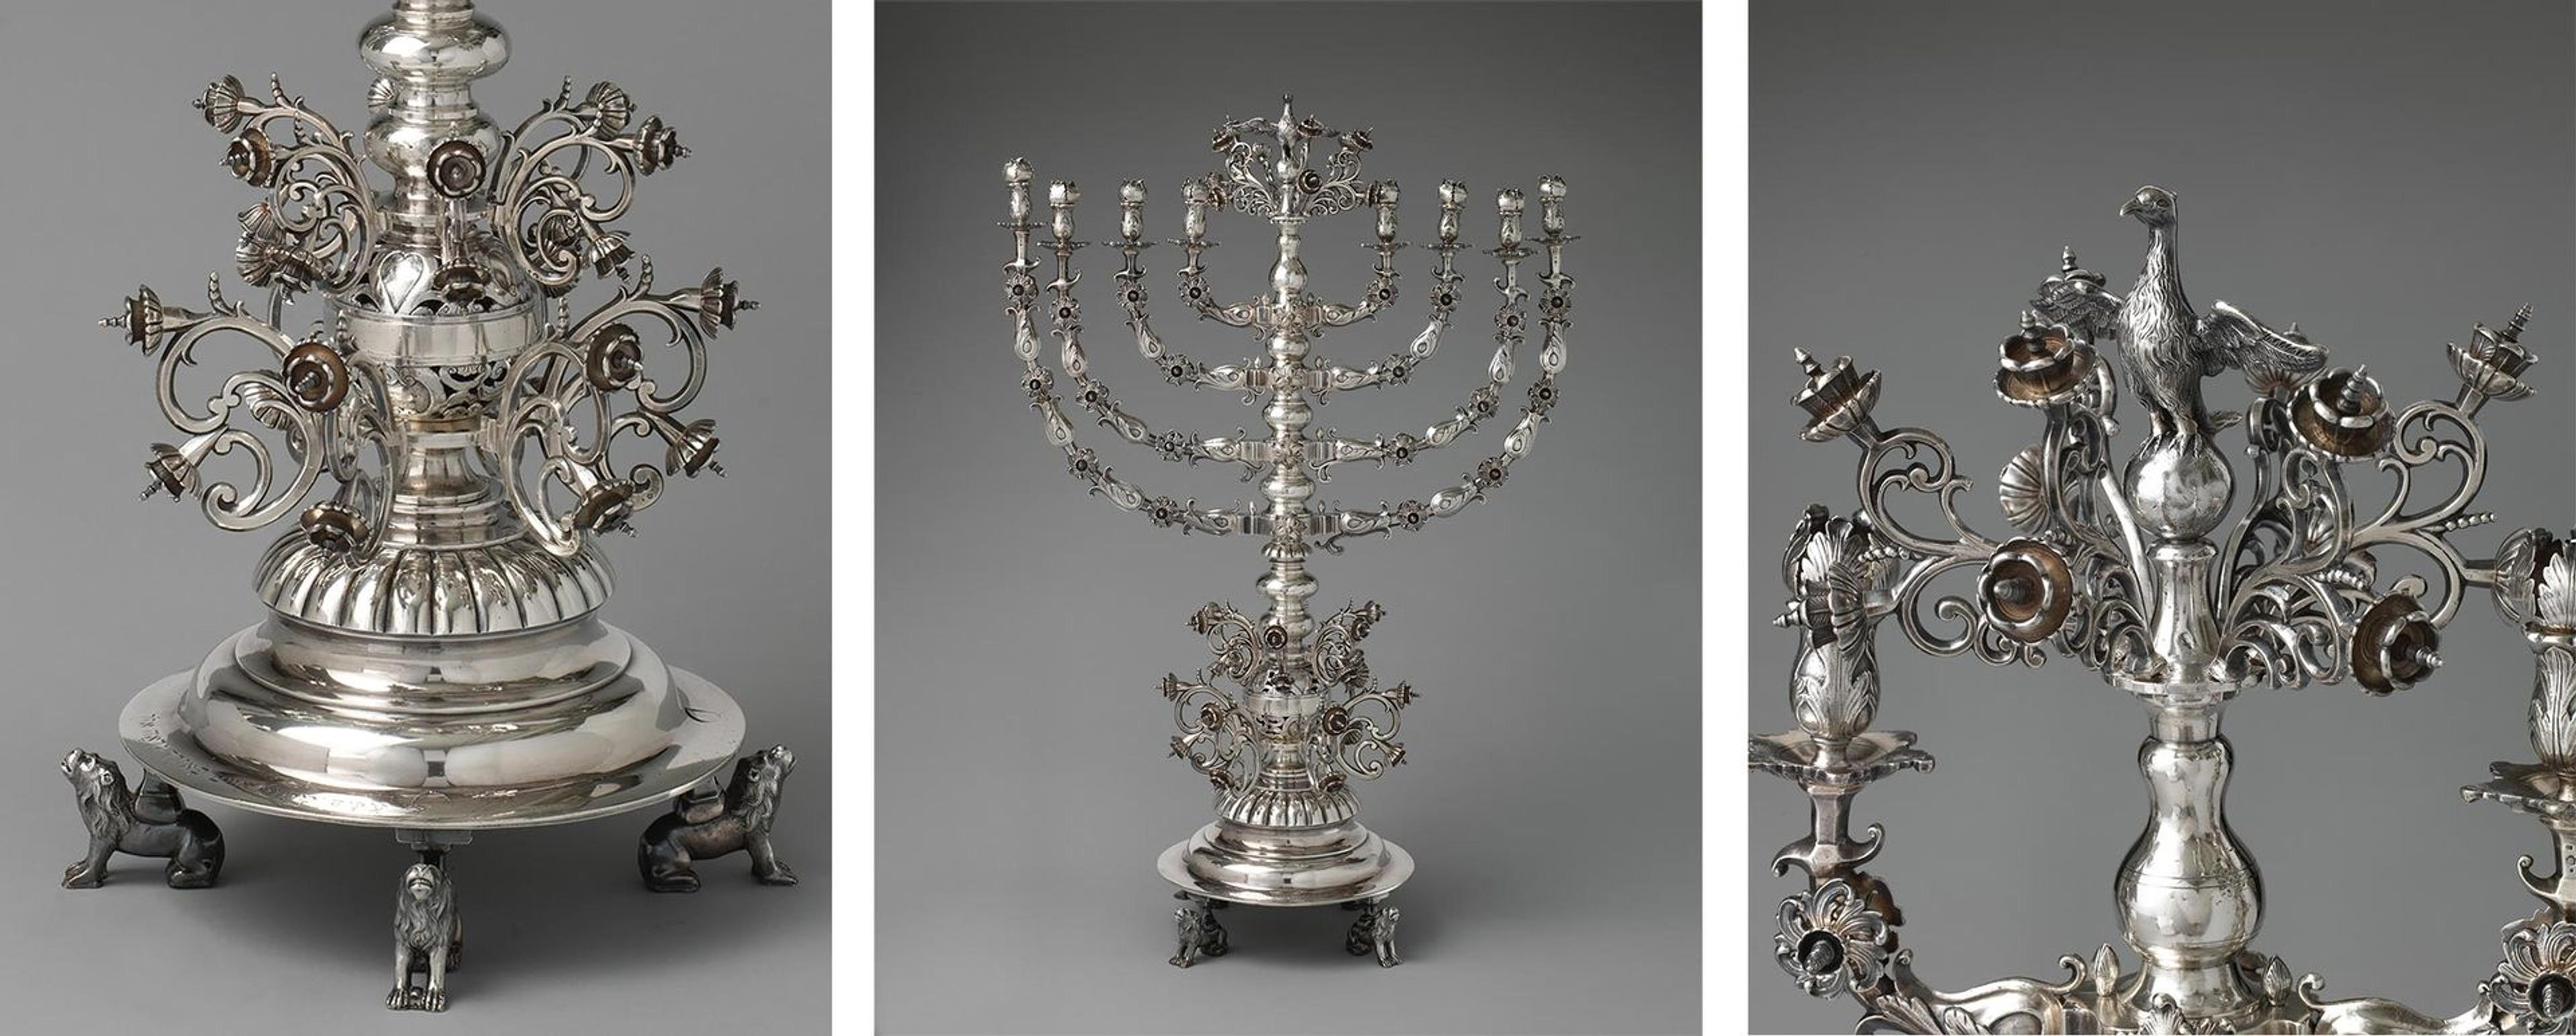 An ornate silver menorah with flowers, birds, and lions